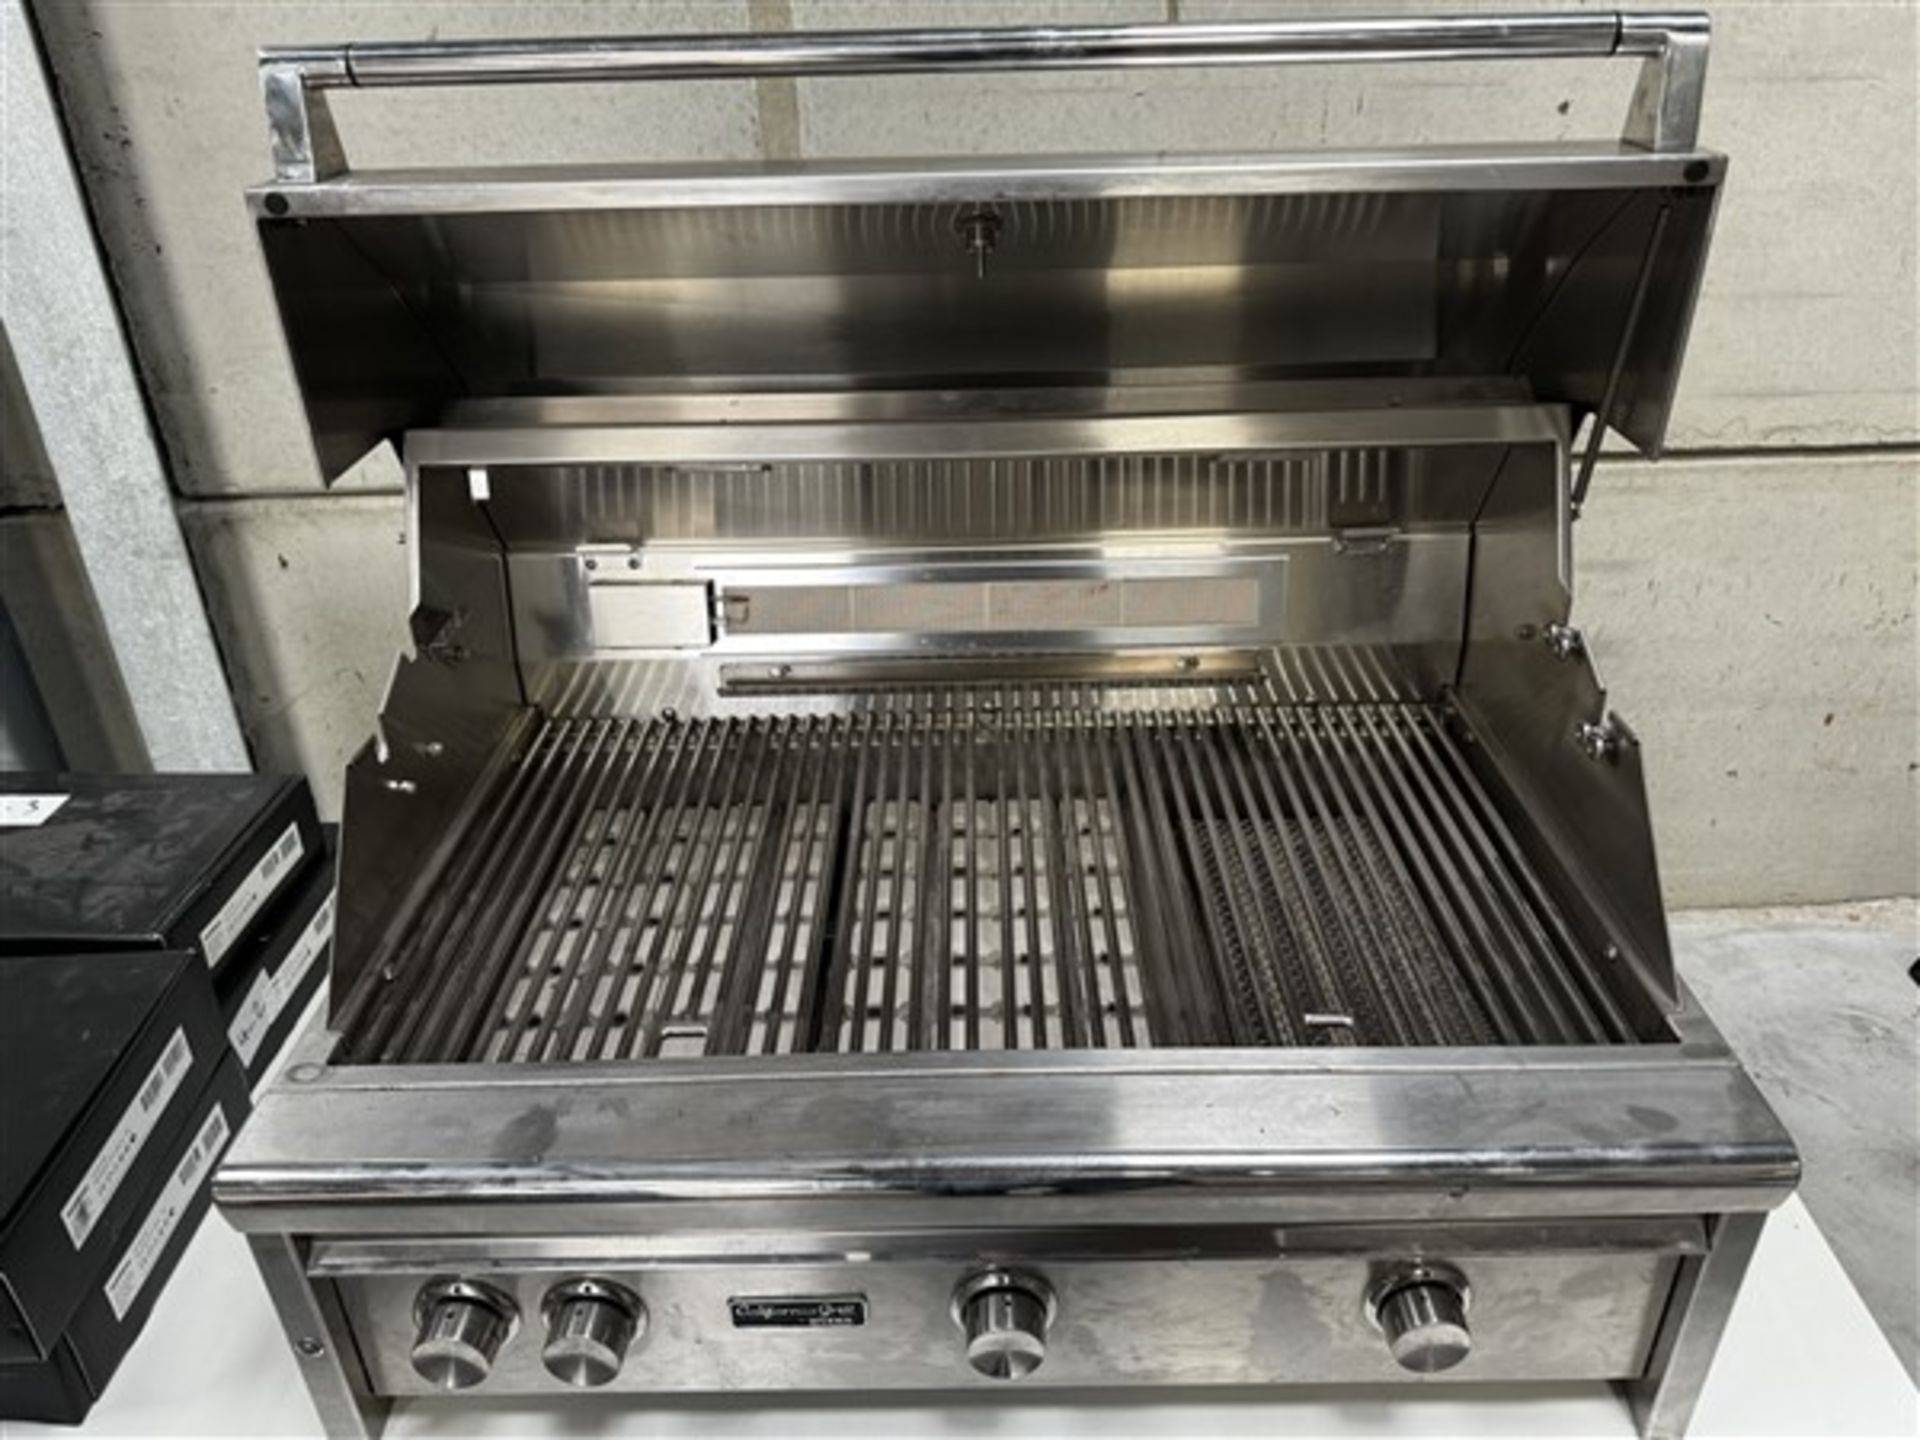 Lynx 'California Grill' gas fired BBQ (working condition unknown, works required) - Image 5 of 6